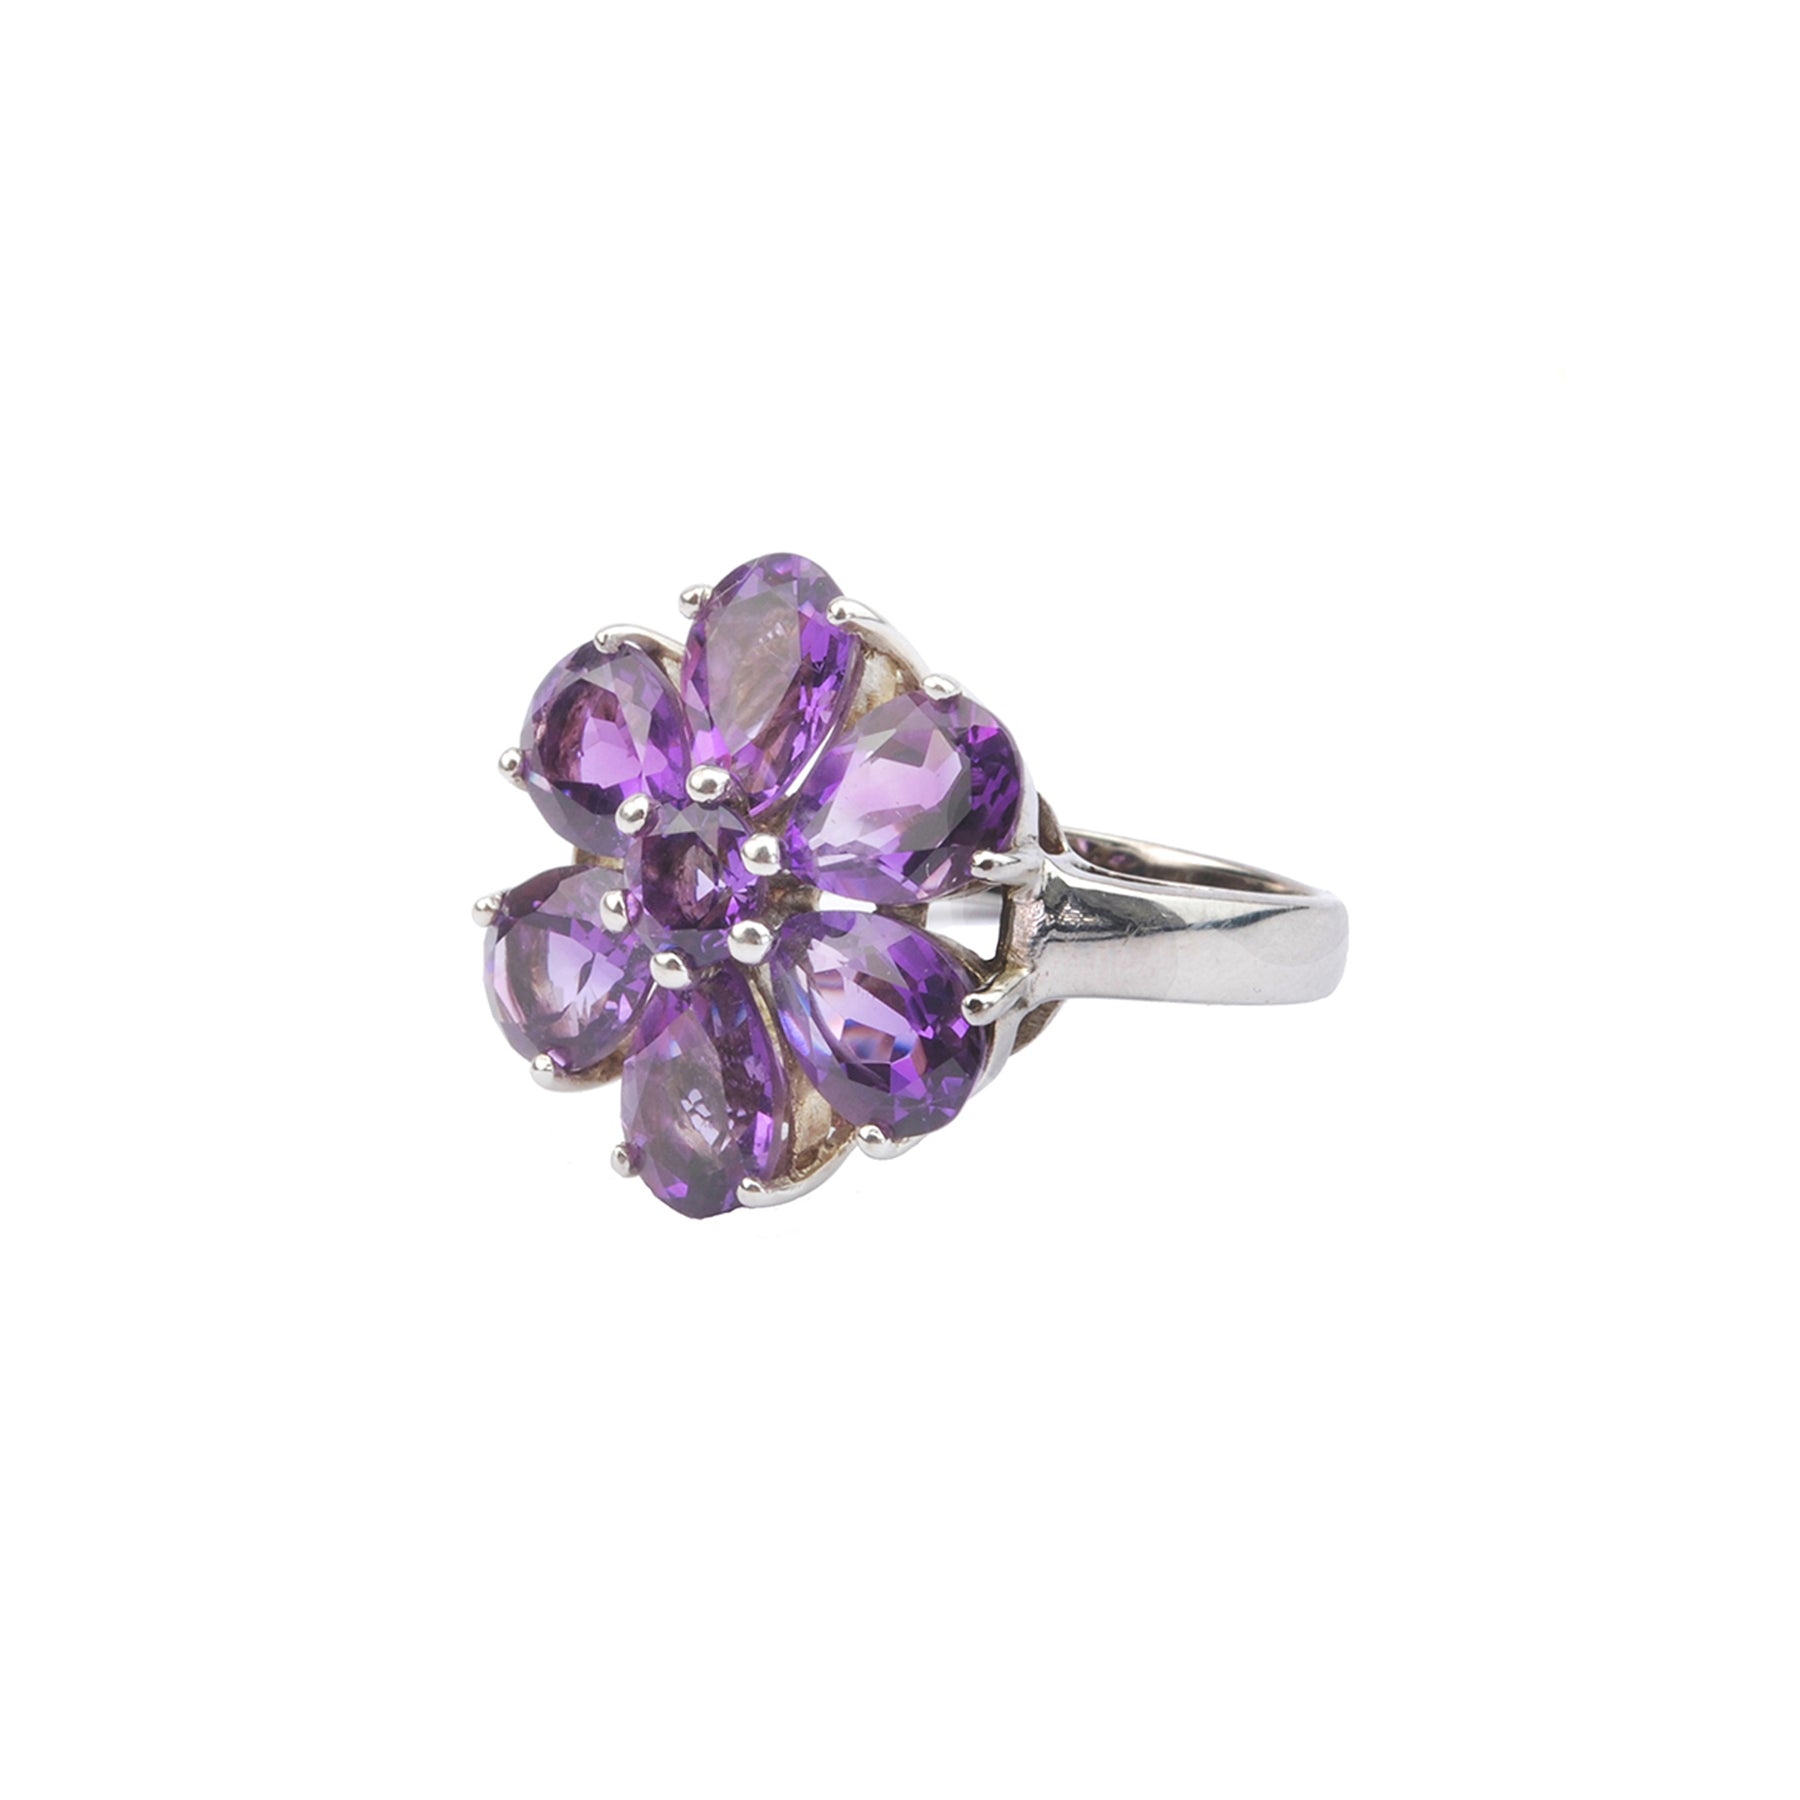 Big flower ring with amethysts